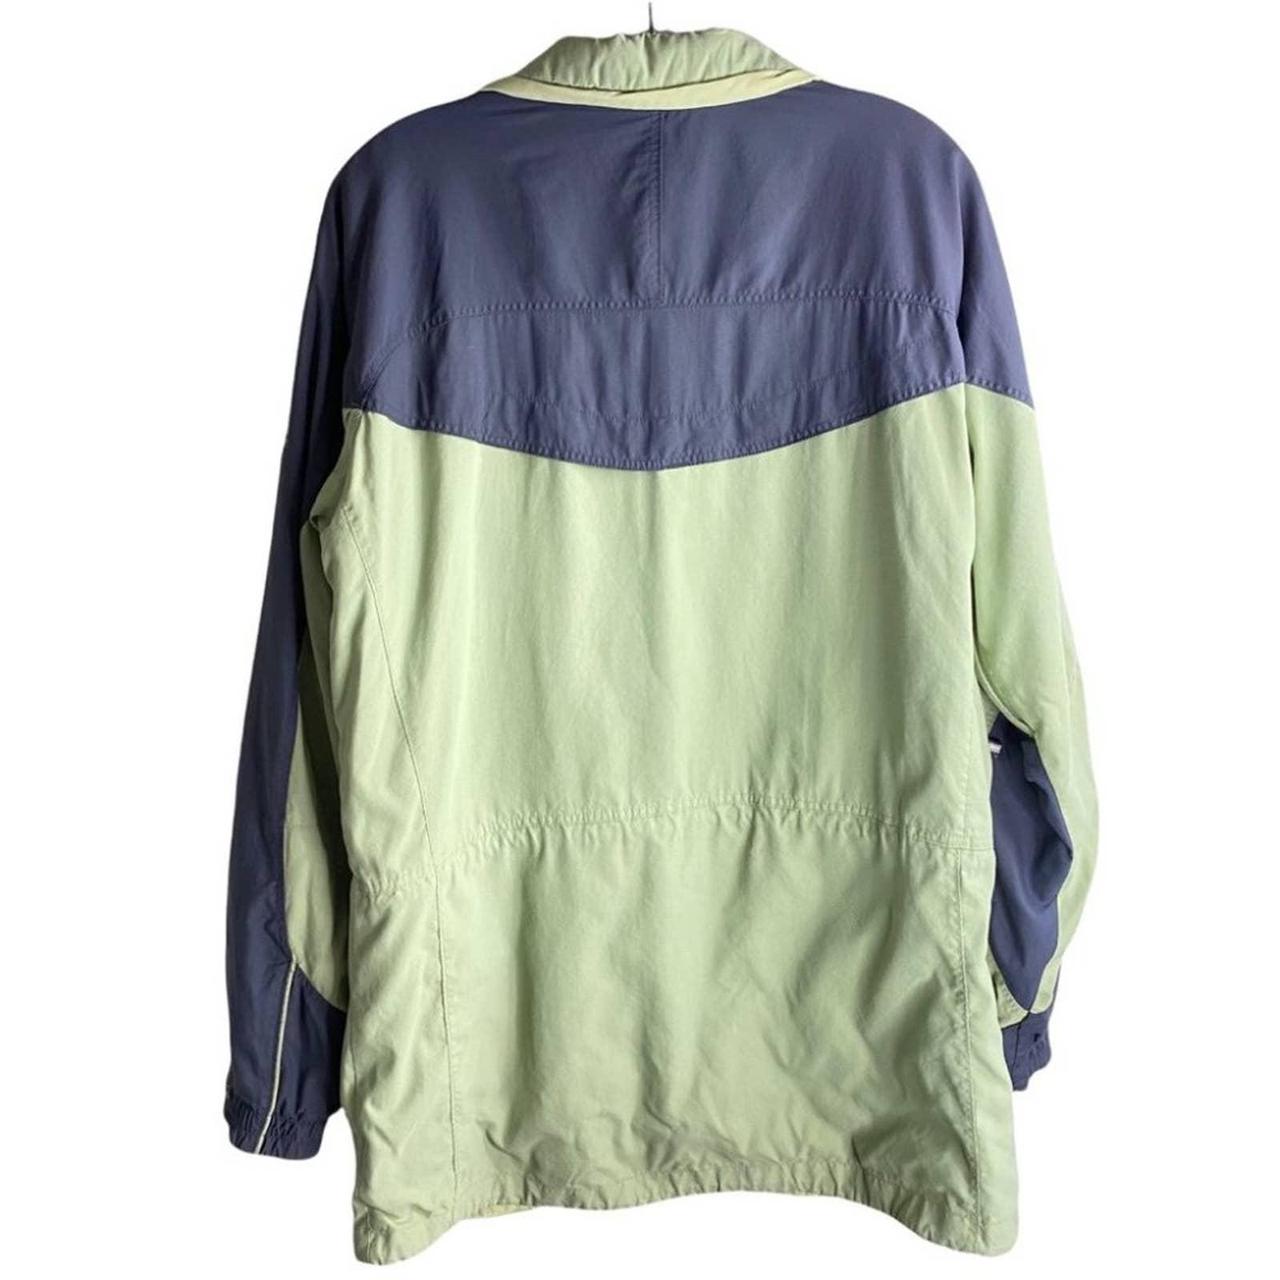 Product Image 2 - Columbia Sportswear Women Vintage Outdoor